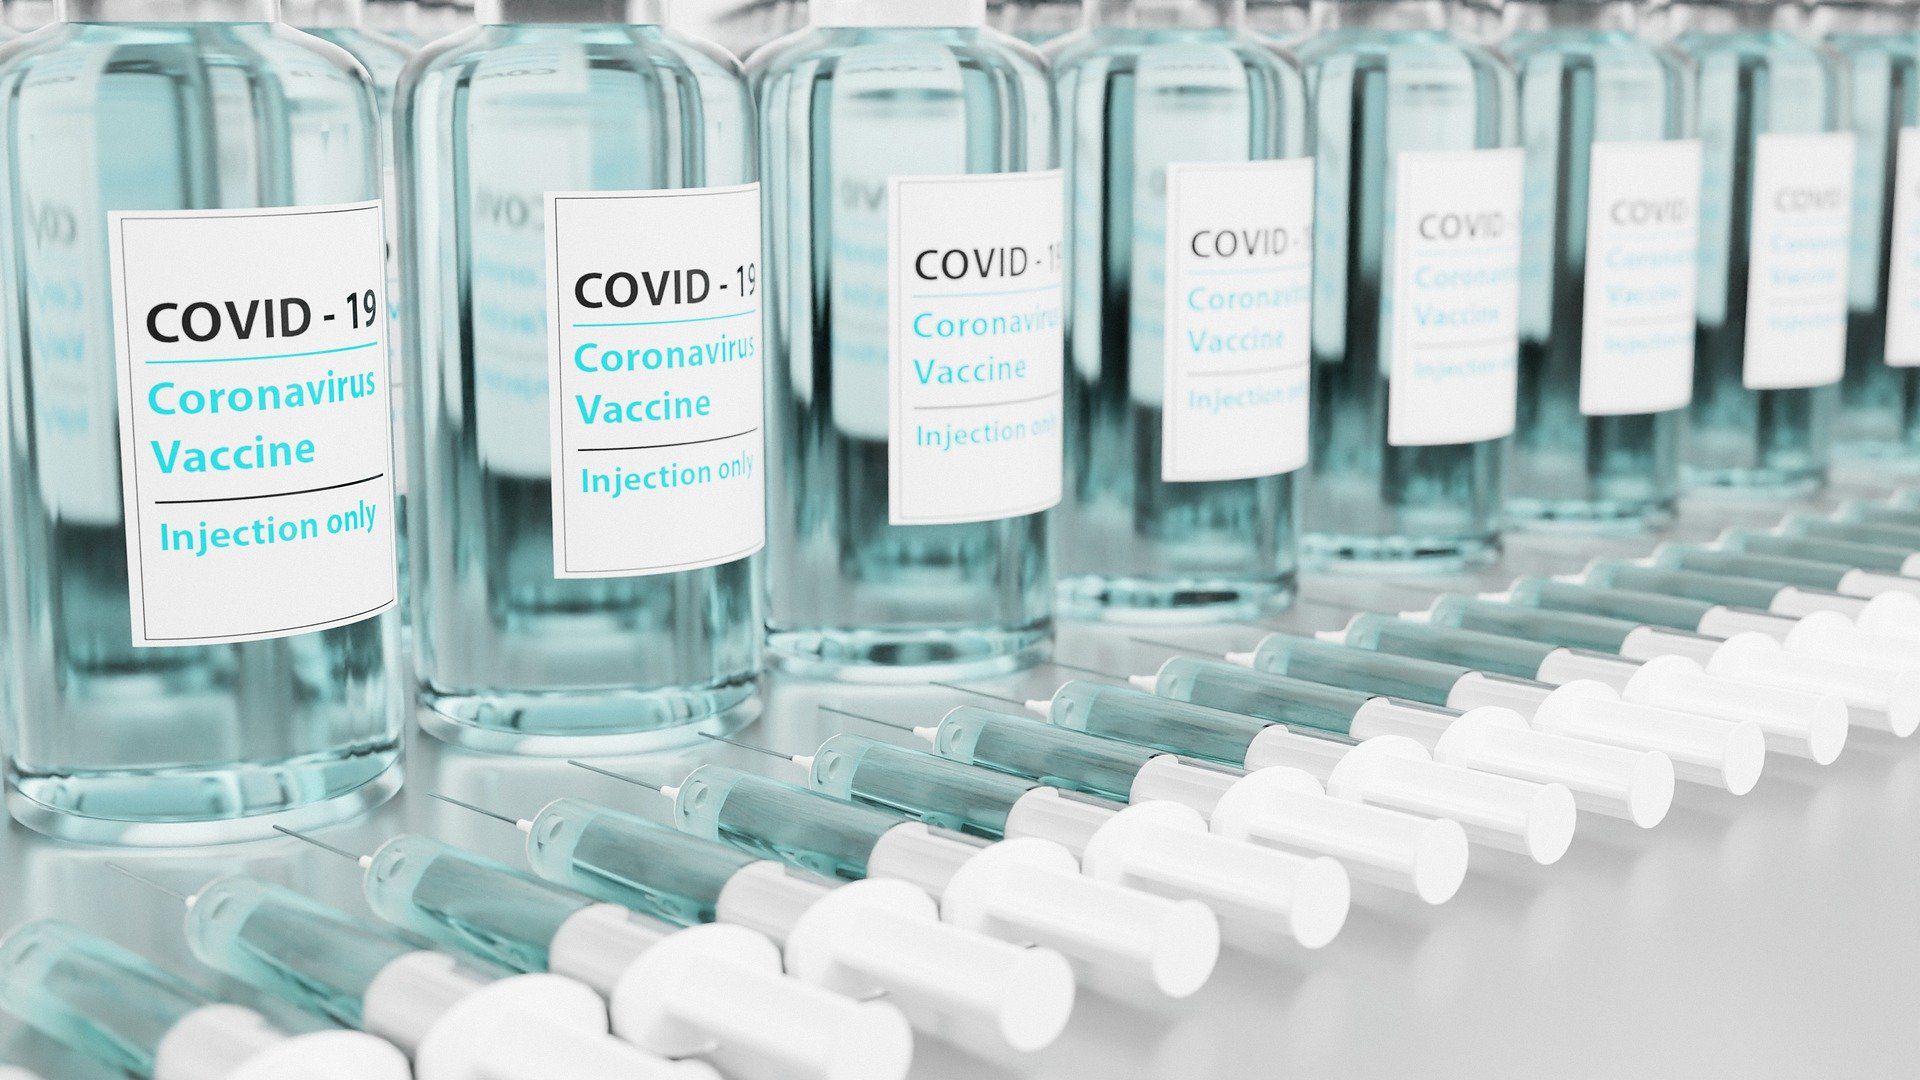 COVID vaccination for 12+ to begin in Germany from June 7